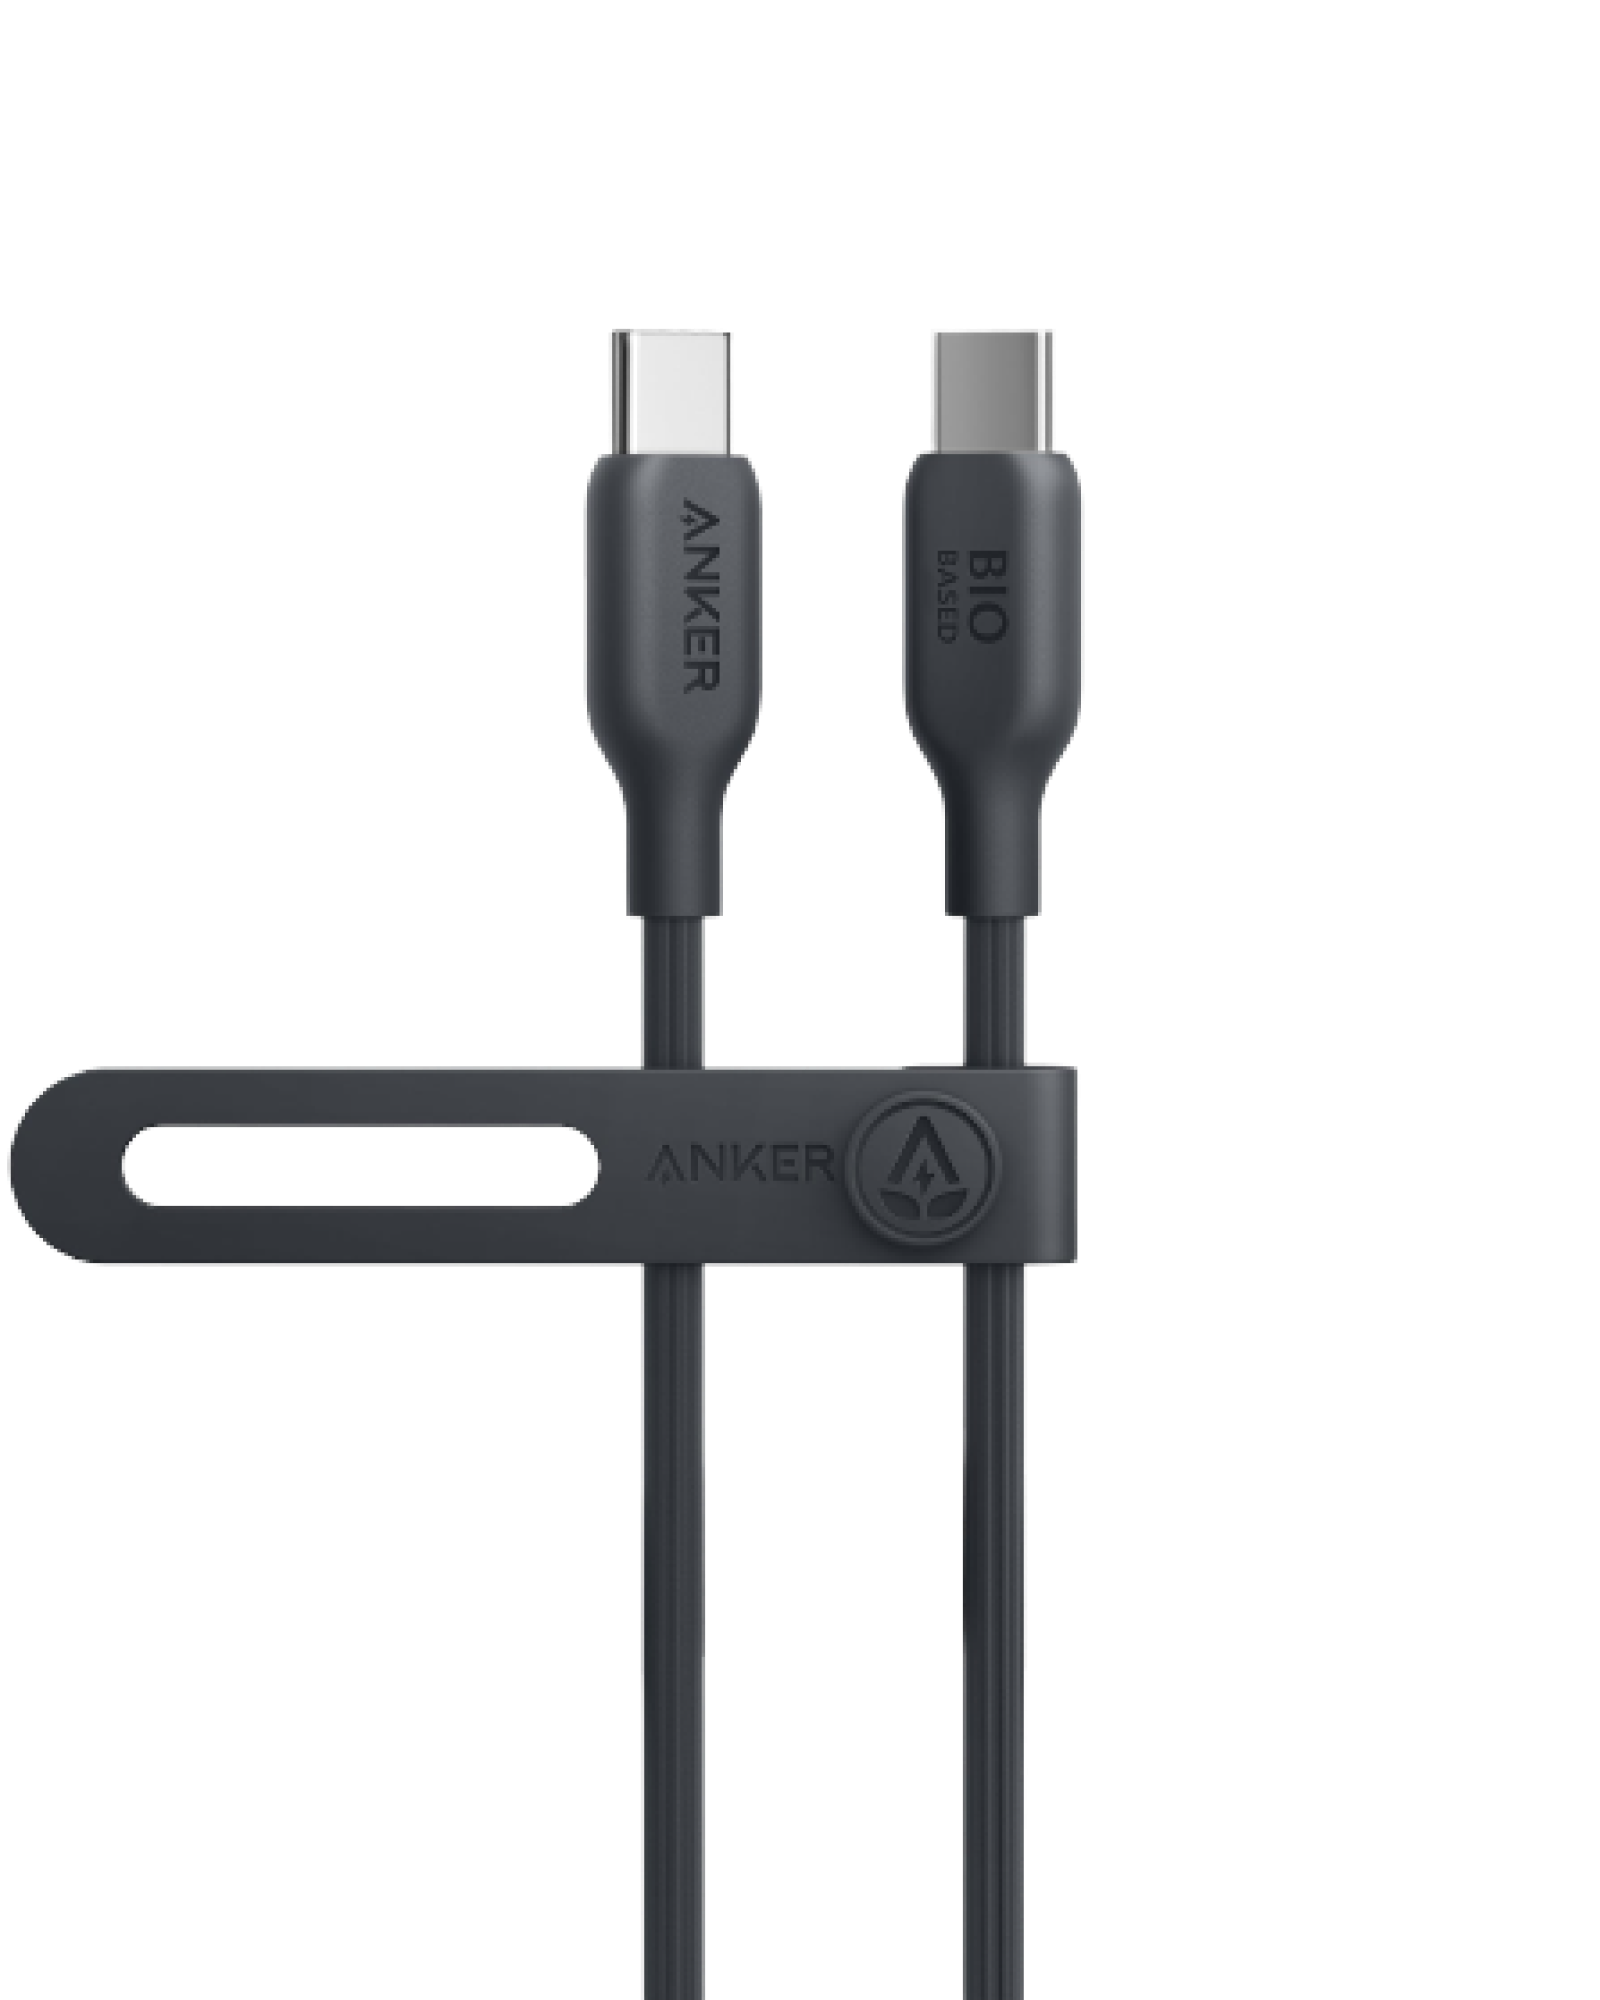 Cables - Anker UK